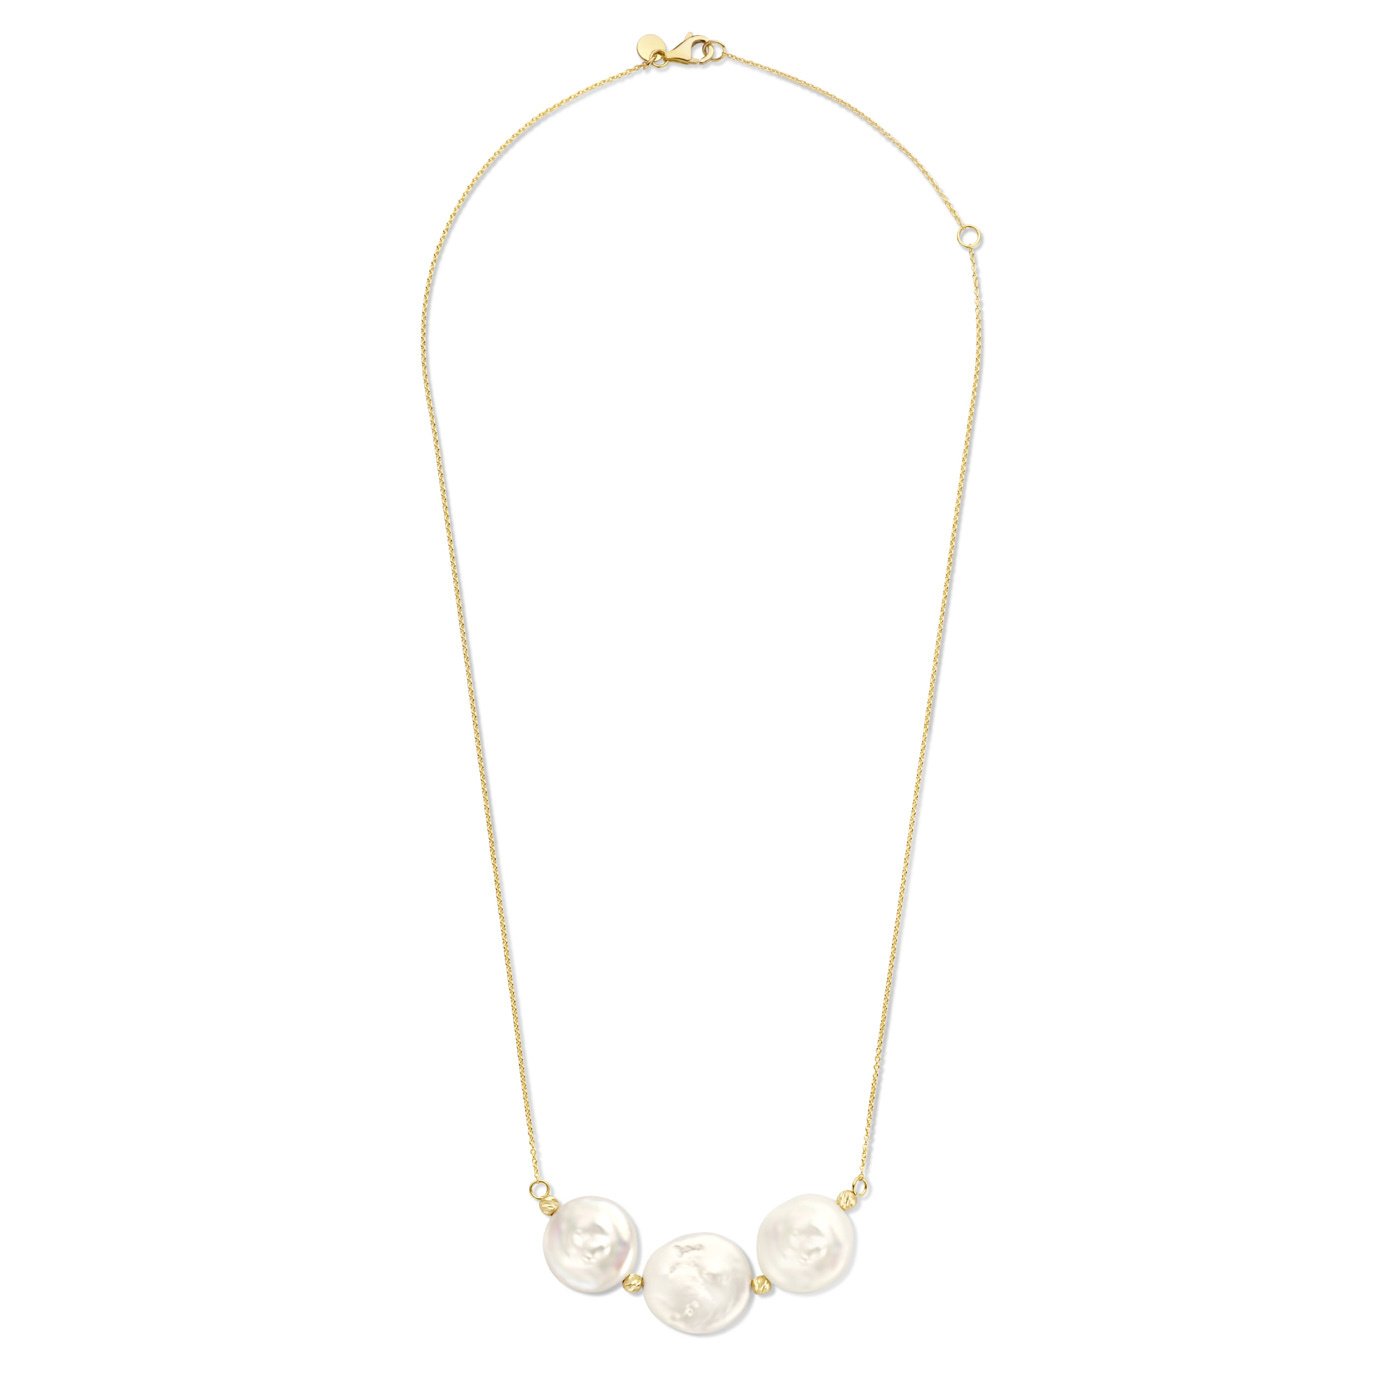 Monte Napoleone Alcinia 9 karat gold necklace with freshwater pearls